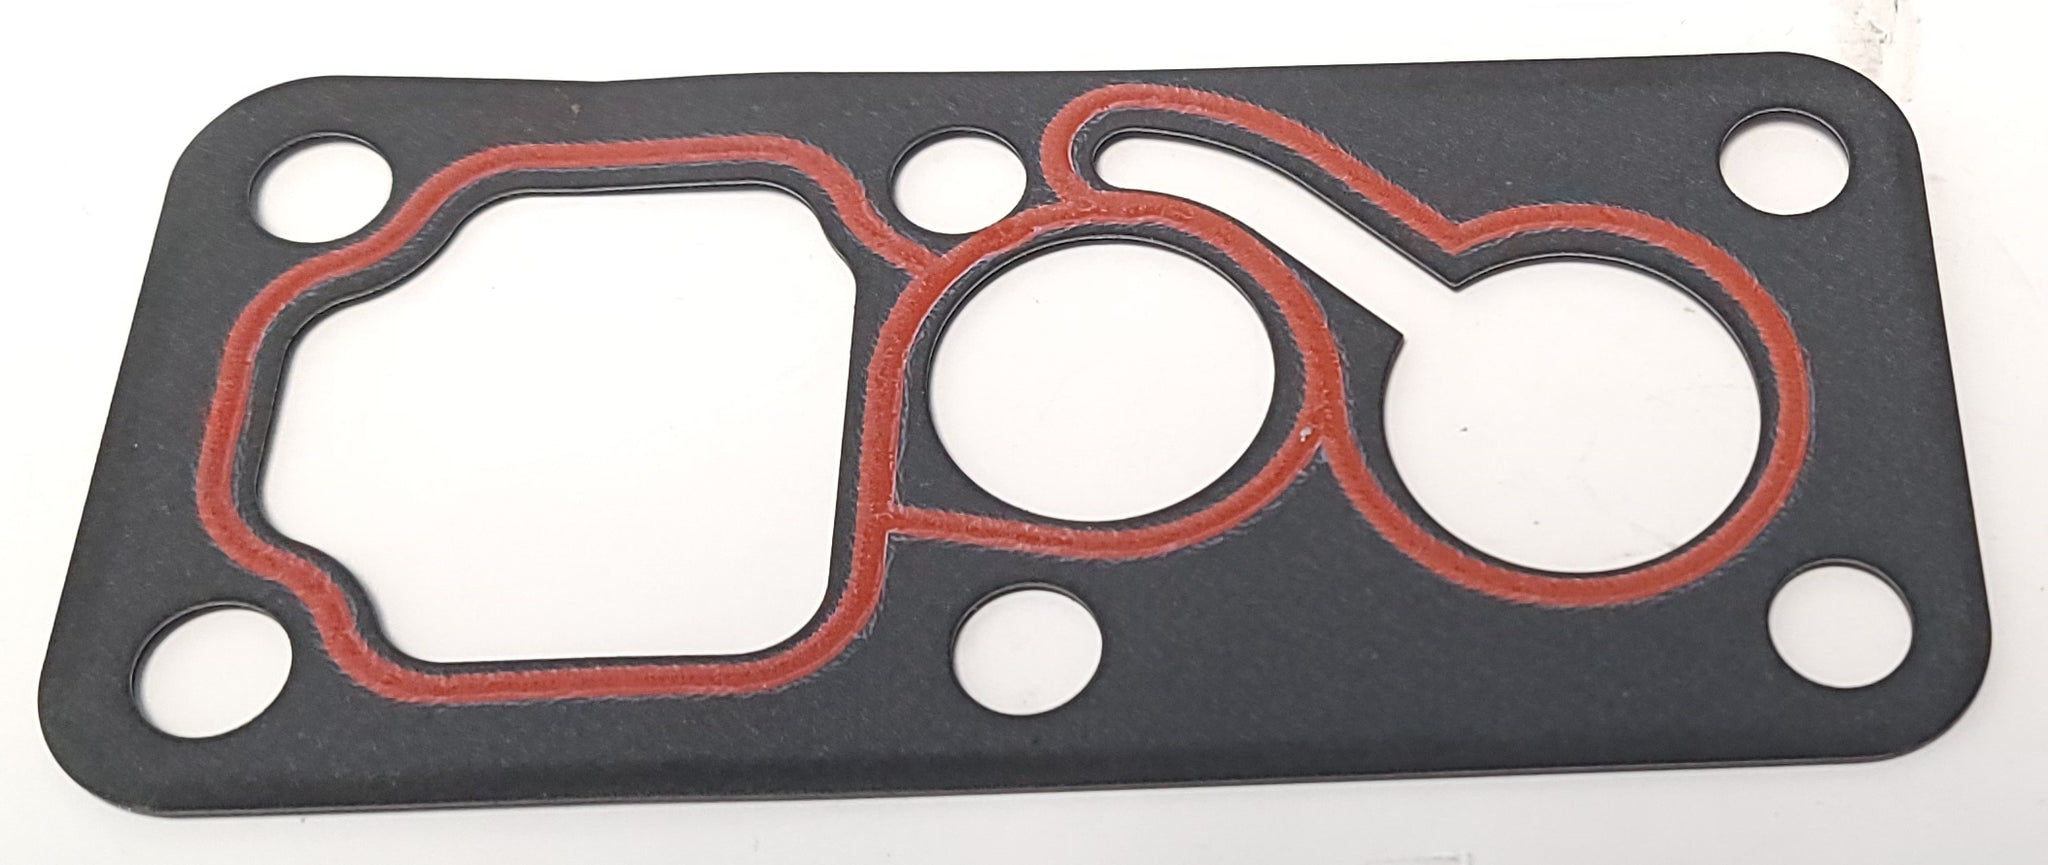 (NEW OLD STOCK) 3064199 - Cummins Connection Gasket